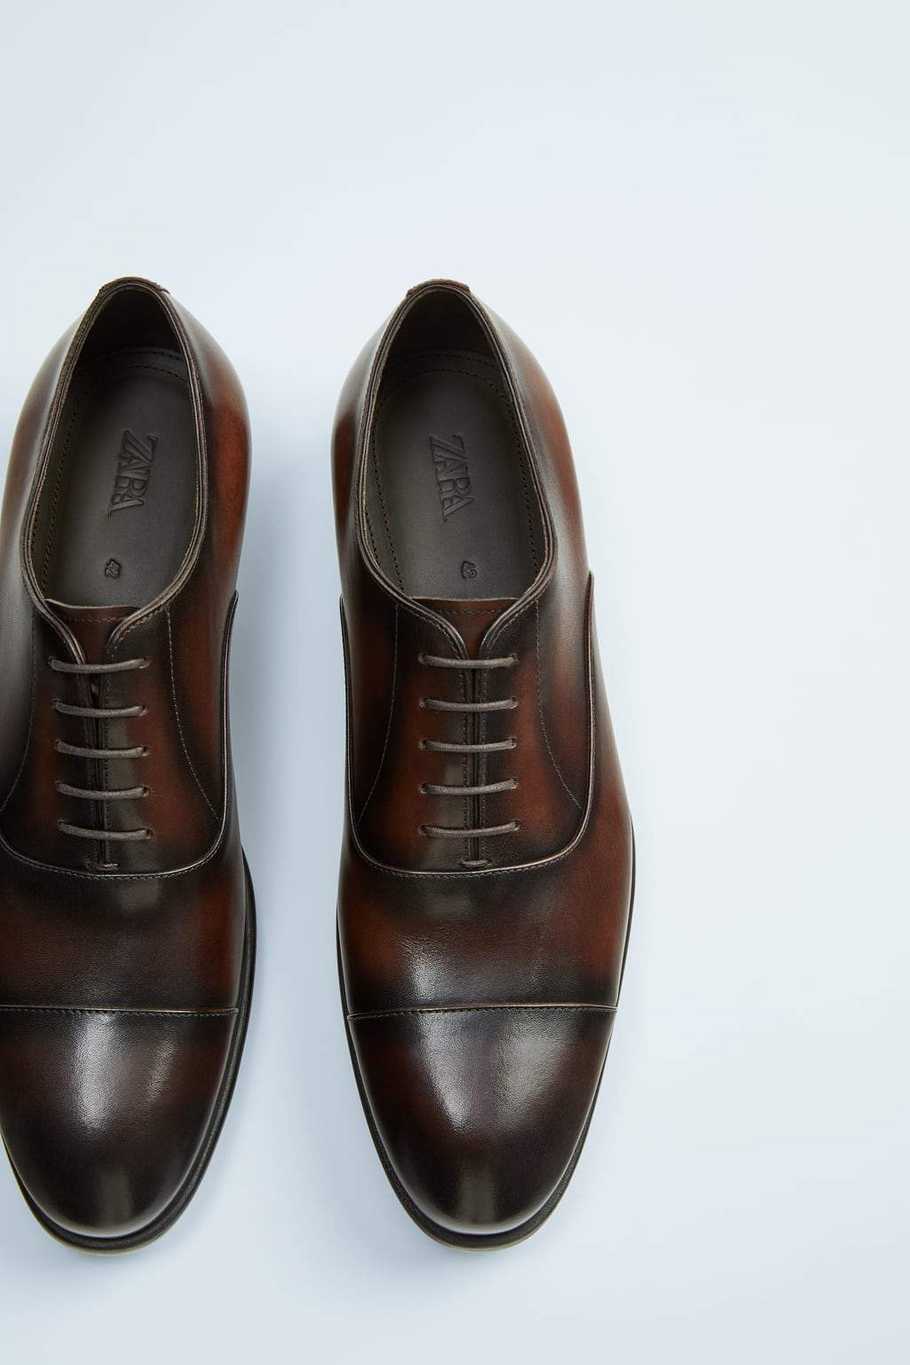 zara-shoes-brown-leather-deck-shoes